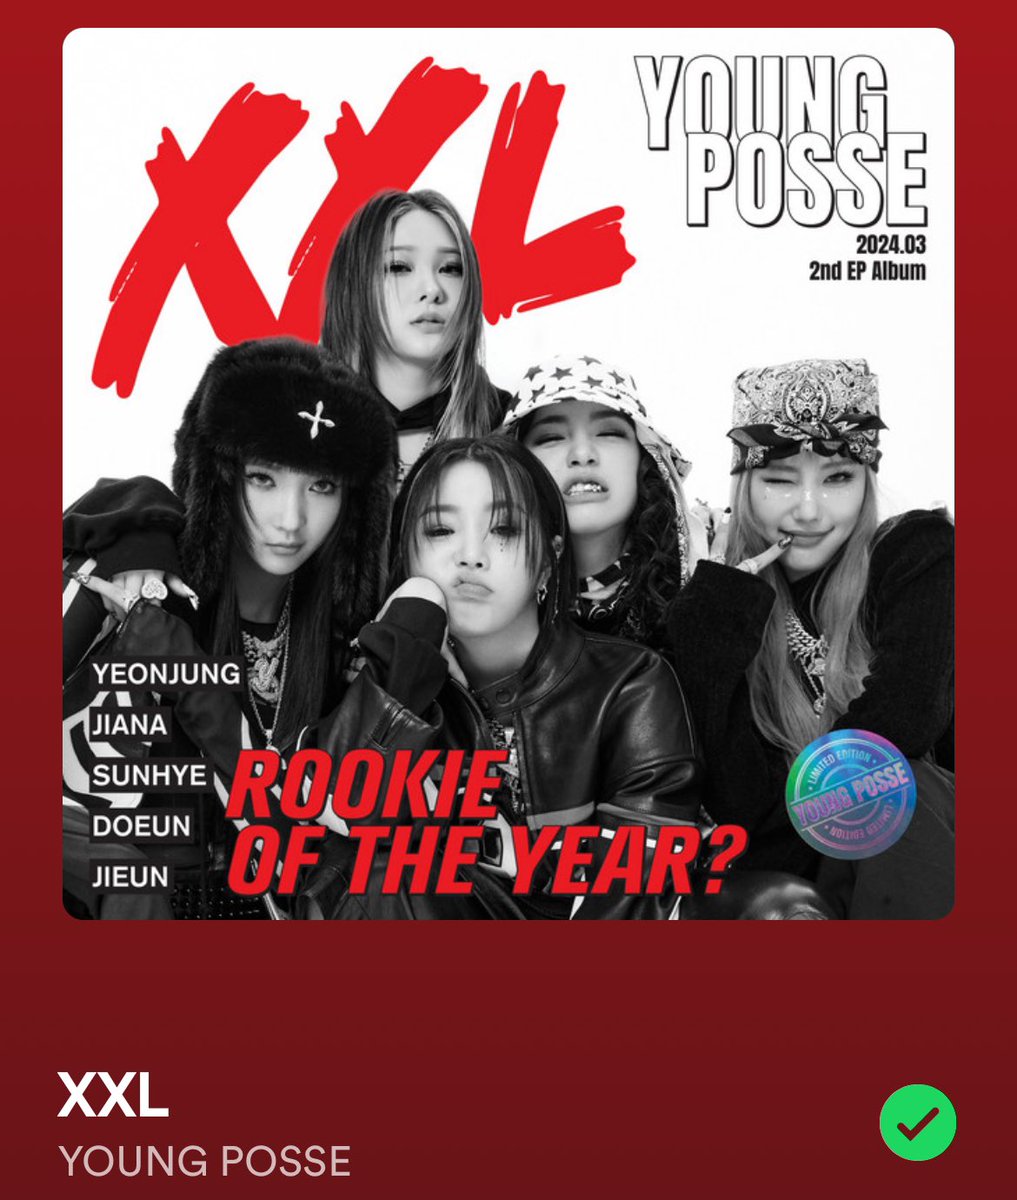 Song Of The Day: 
Day 13 
13/4/24
XXL - Young Posse